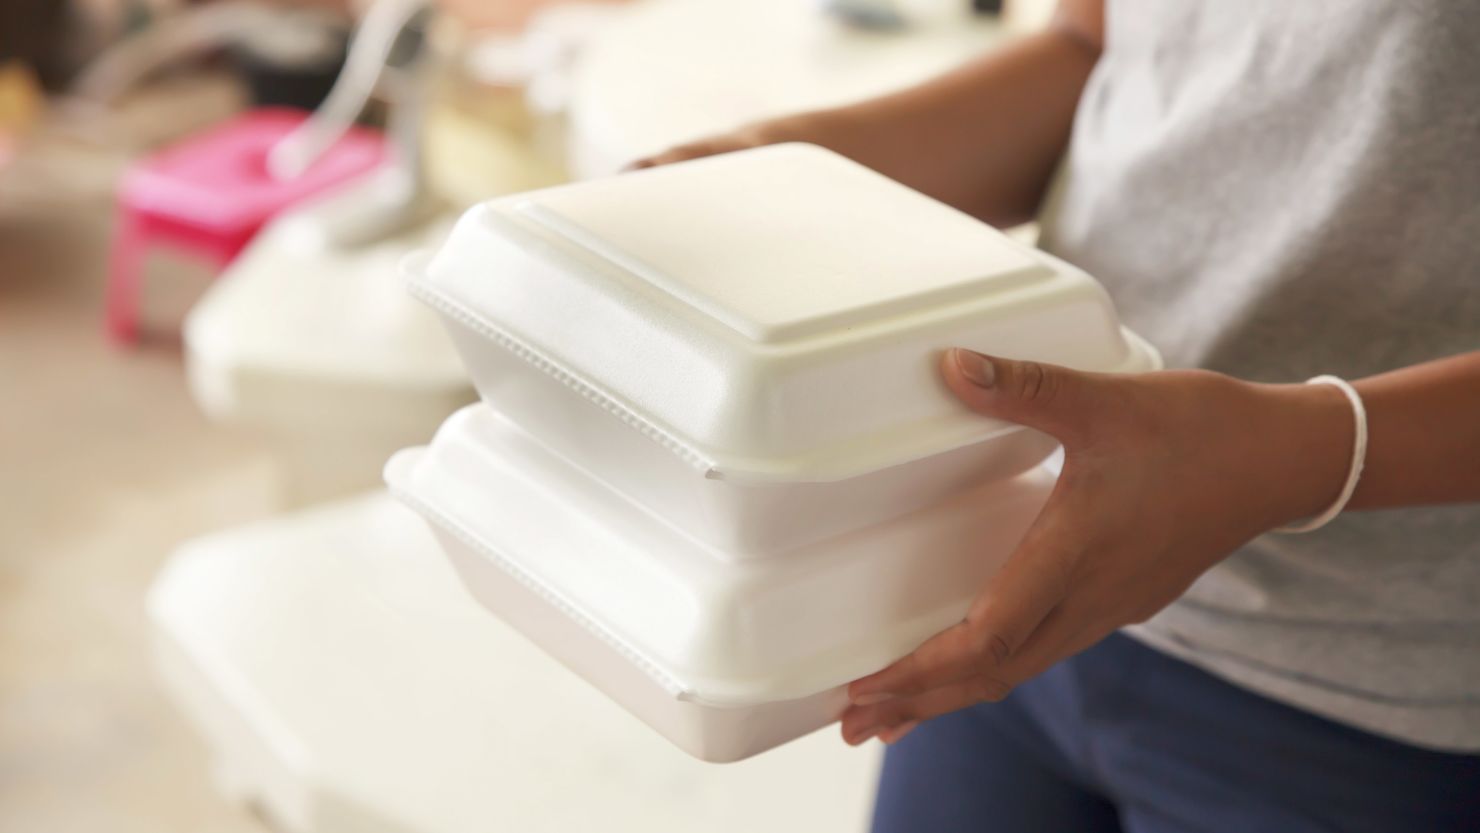 Maine becomes the first state to ban styrofoam